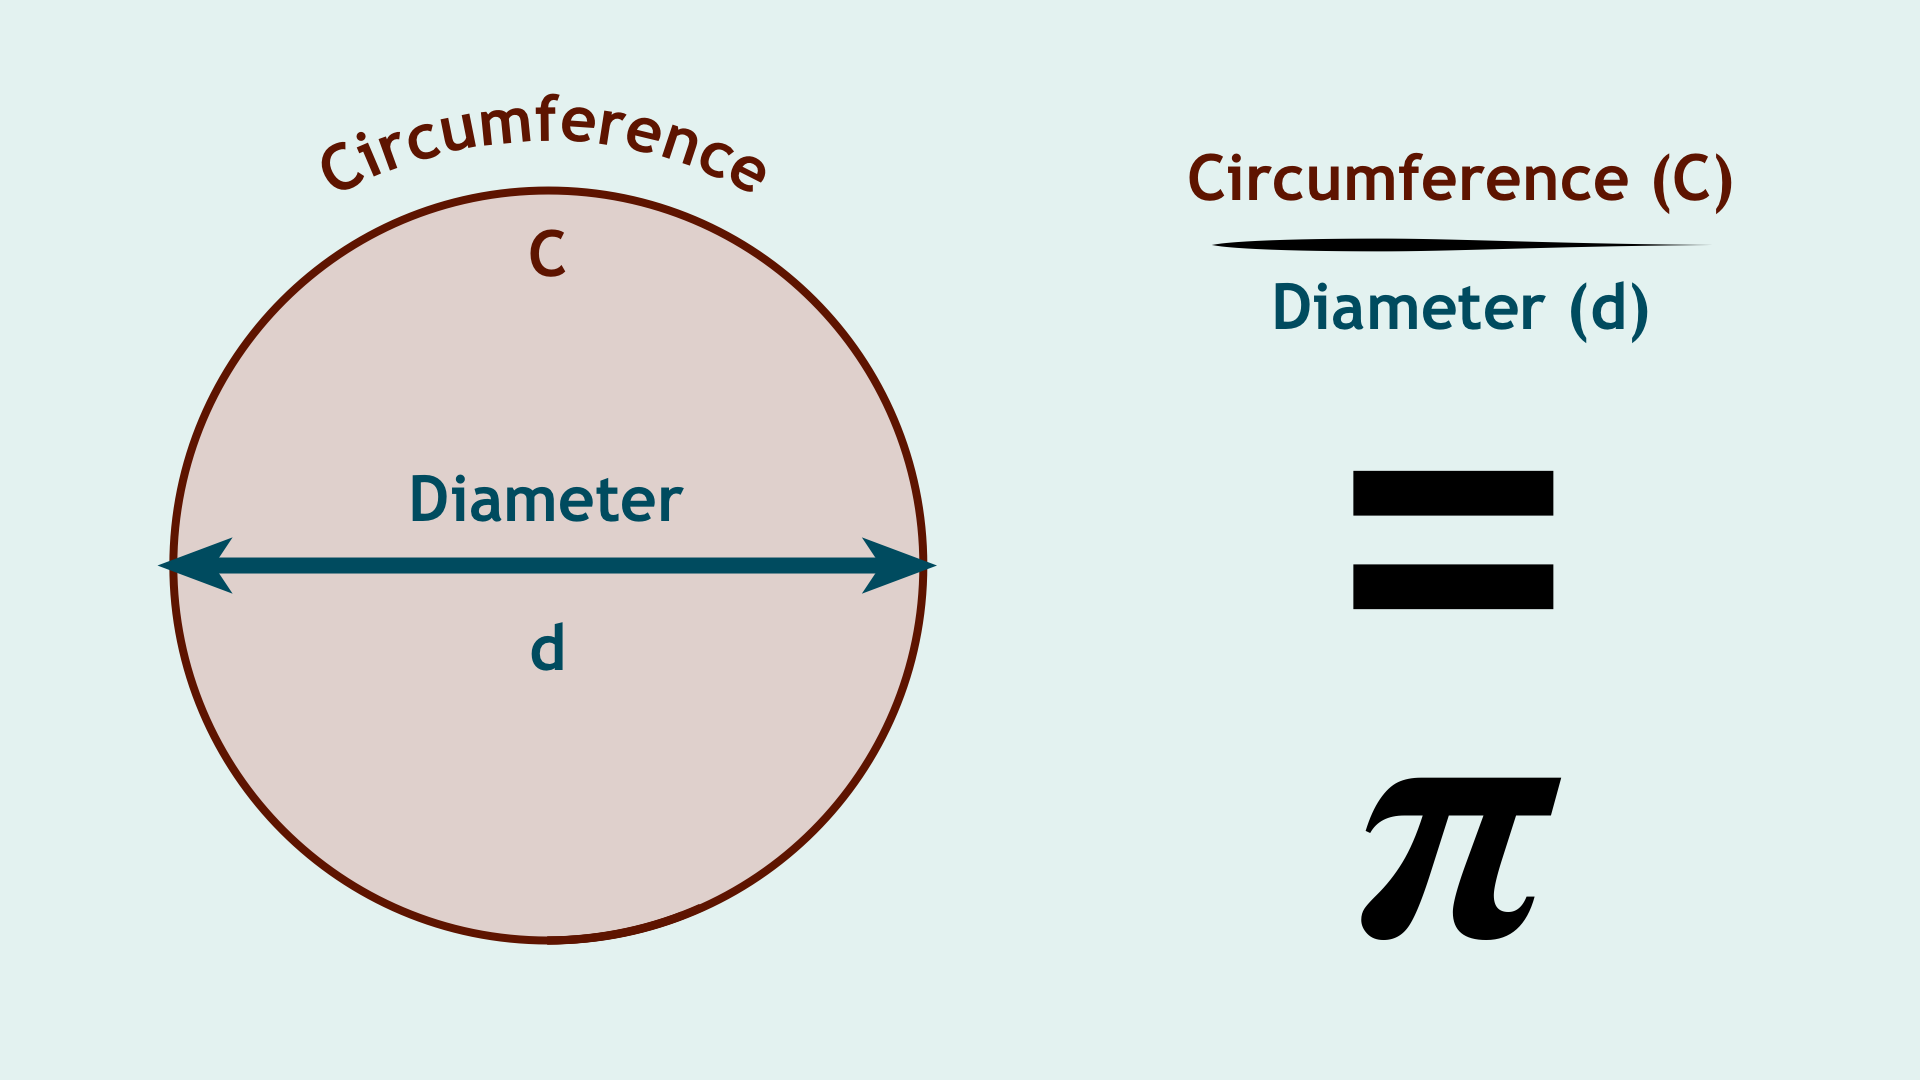 Circumference divided by diameter equals Pi